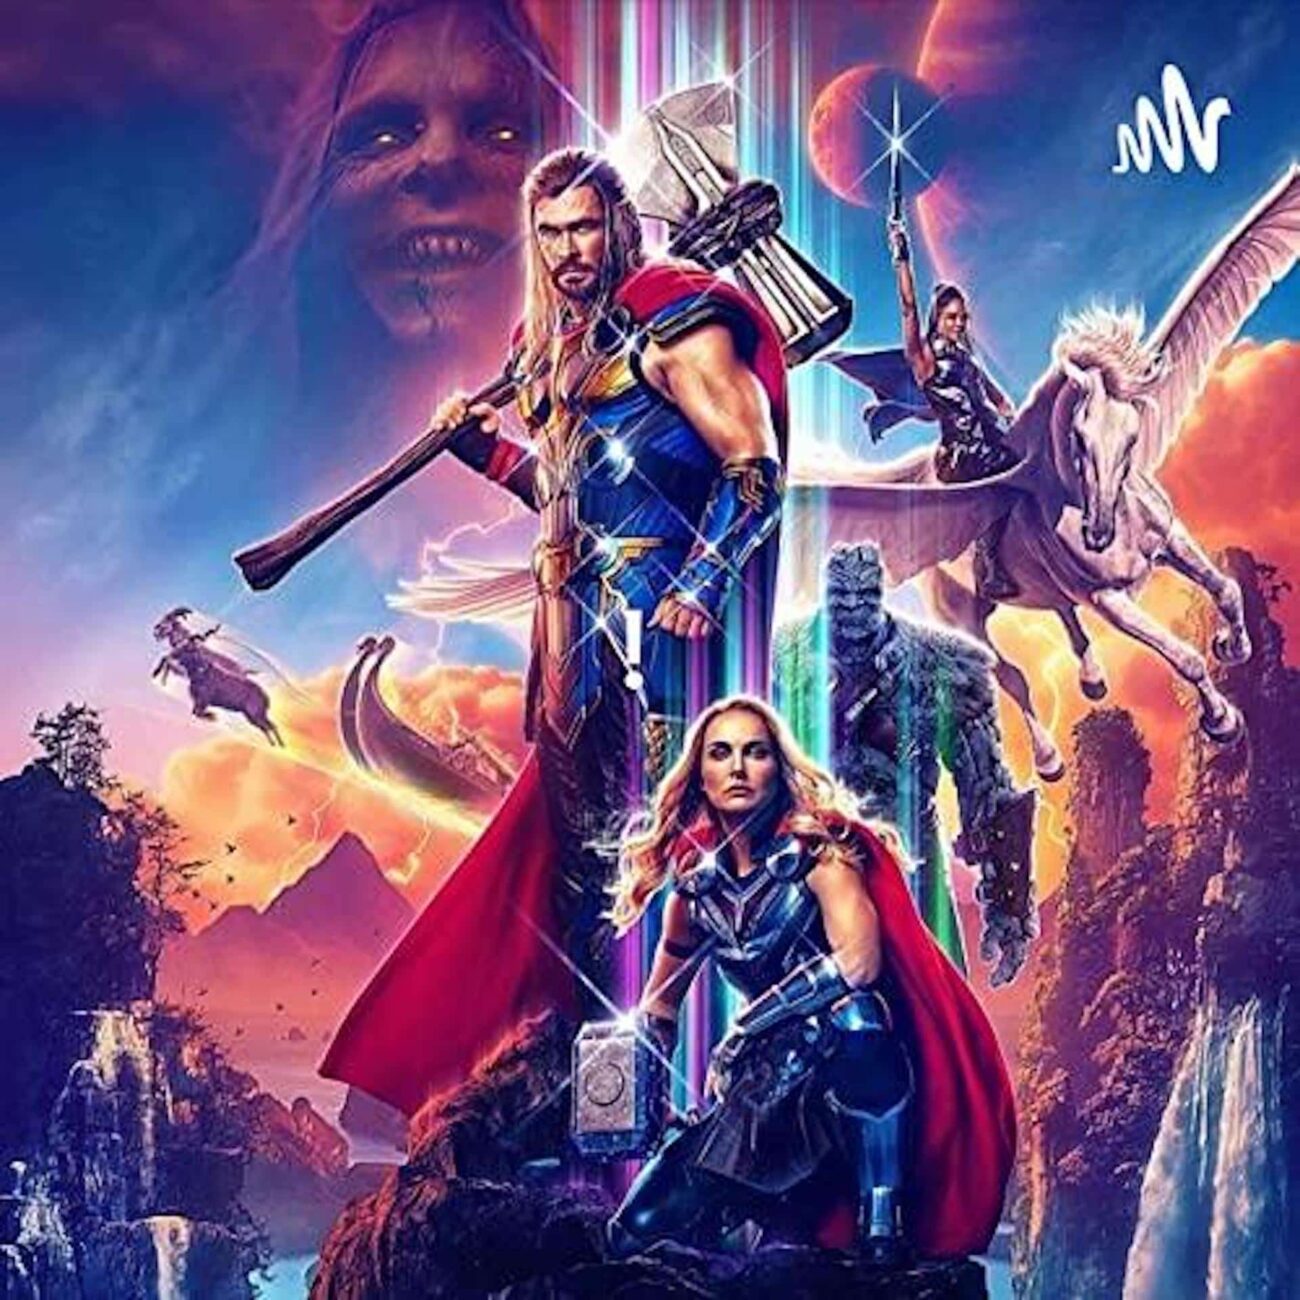 'Thor:Love and Thunder' is Finally here. Find out where to stream Marvel's Superhero movie Thor: Love and Thunder online for free.